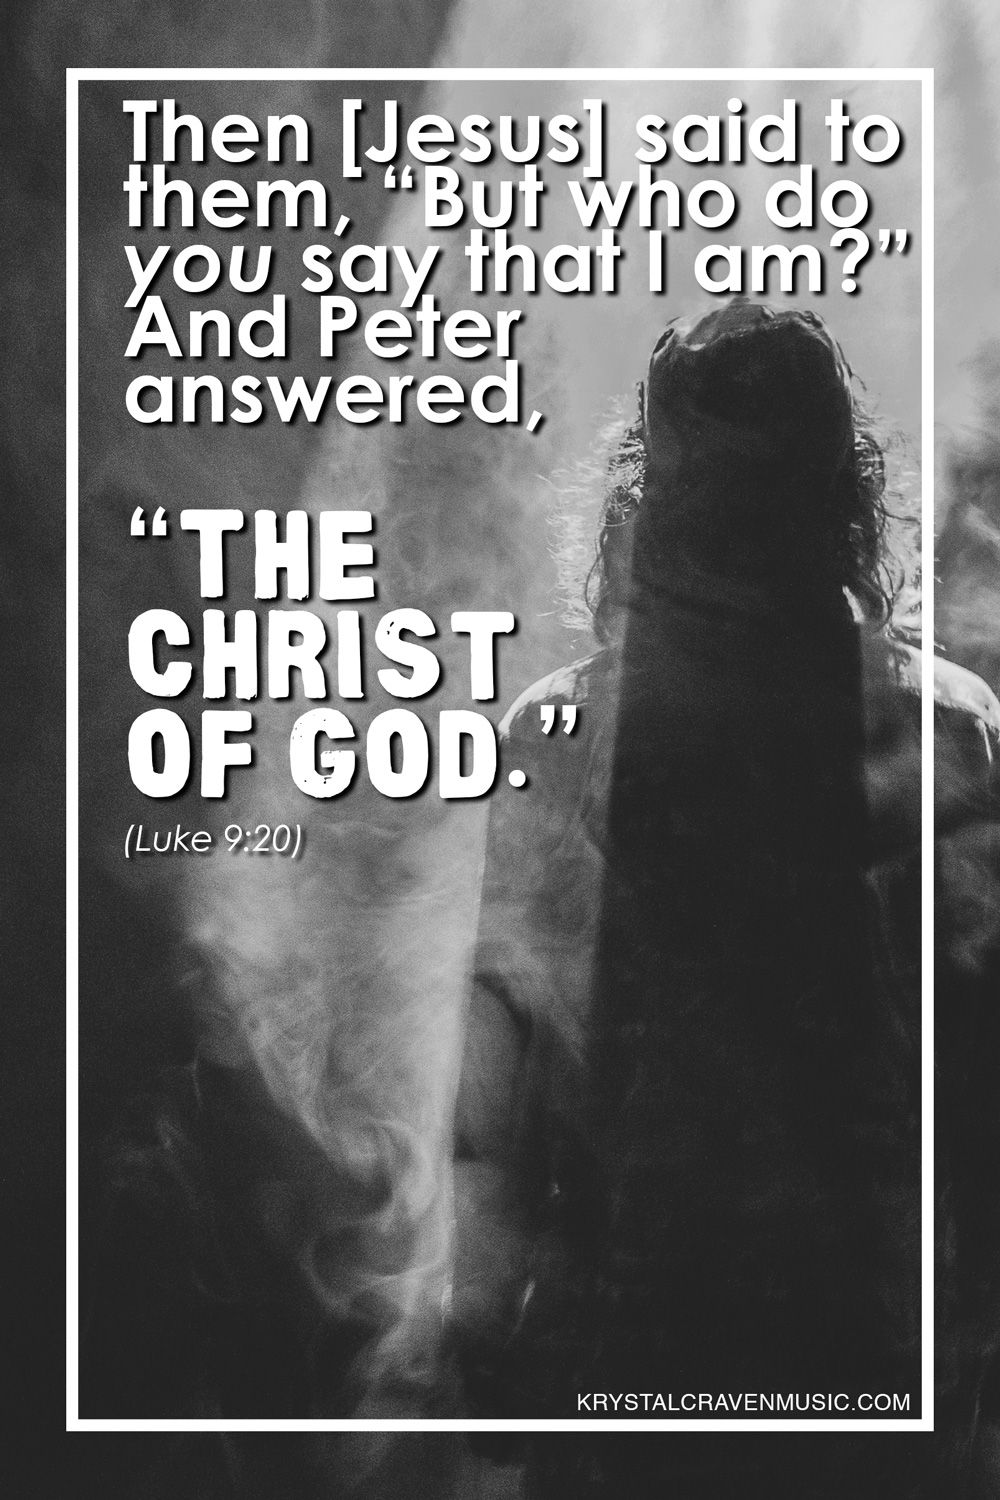 The text of Luke 9:20, "Then Jesus said to them, "But who do you say that I am?" and Peter answered, "The Christ of God." The text is overlaying the silhouette of a man from behind with a smoke effect all around him.